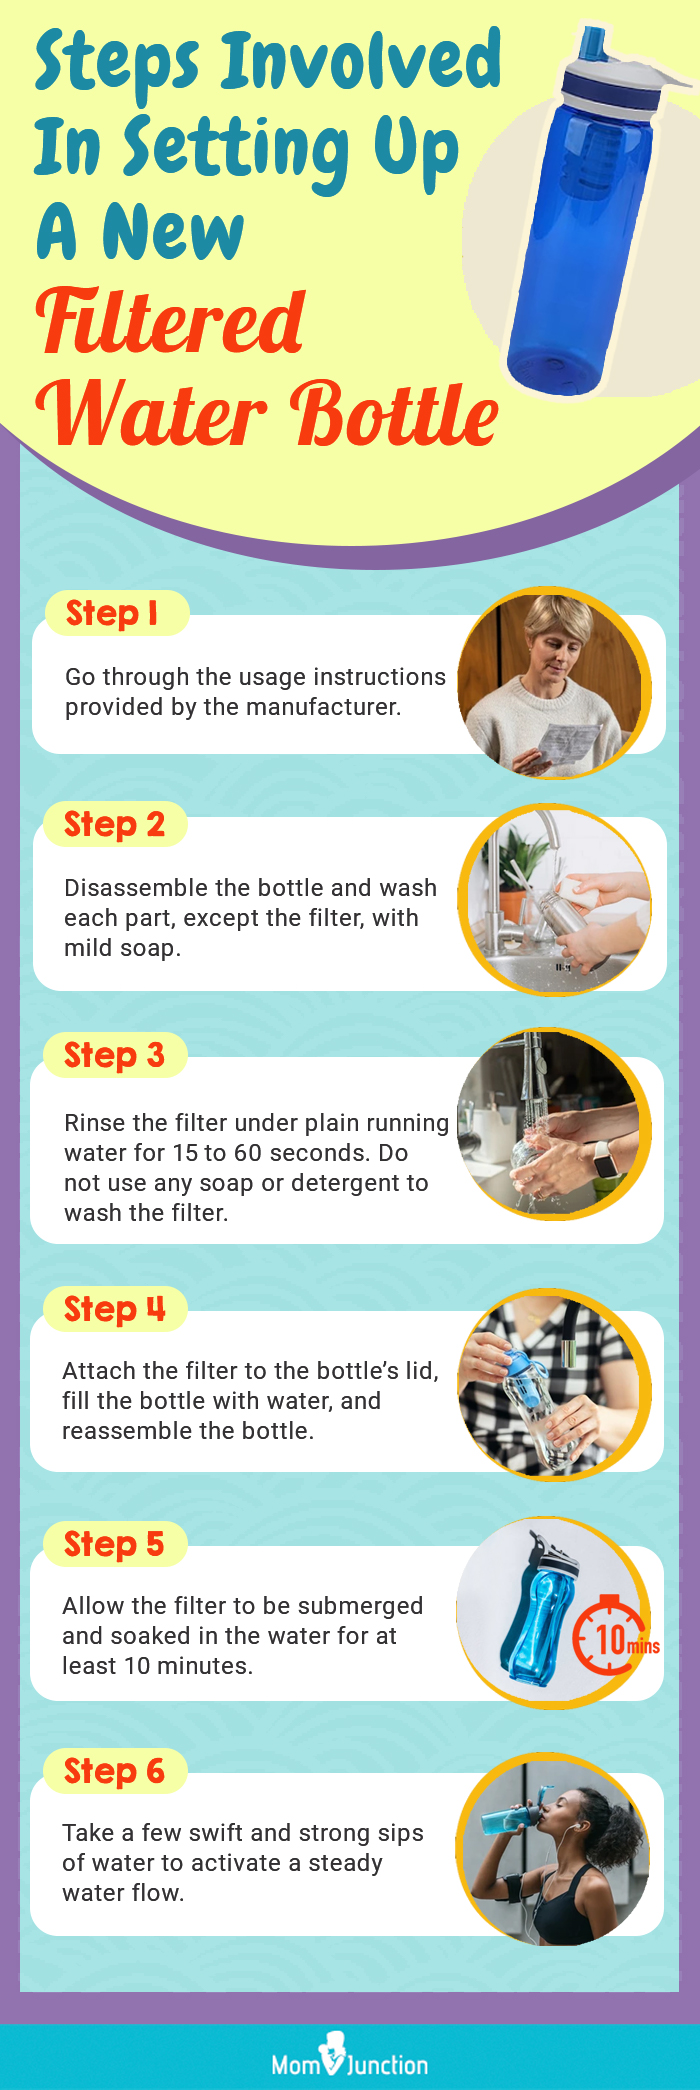 Steps Involved In Setting Up A New Filtered Water Bottle (infographic)